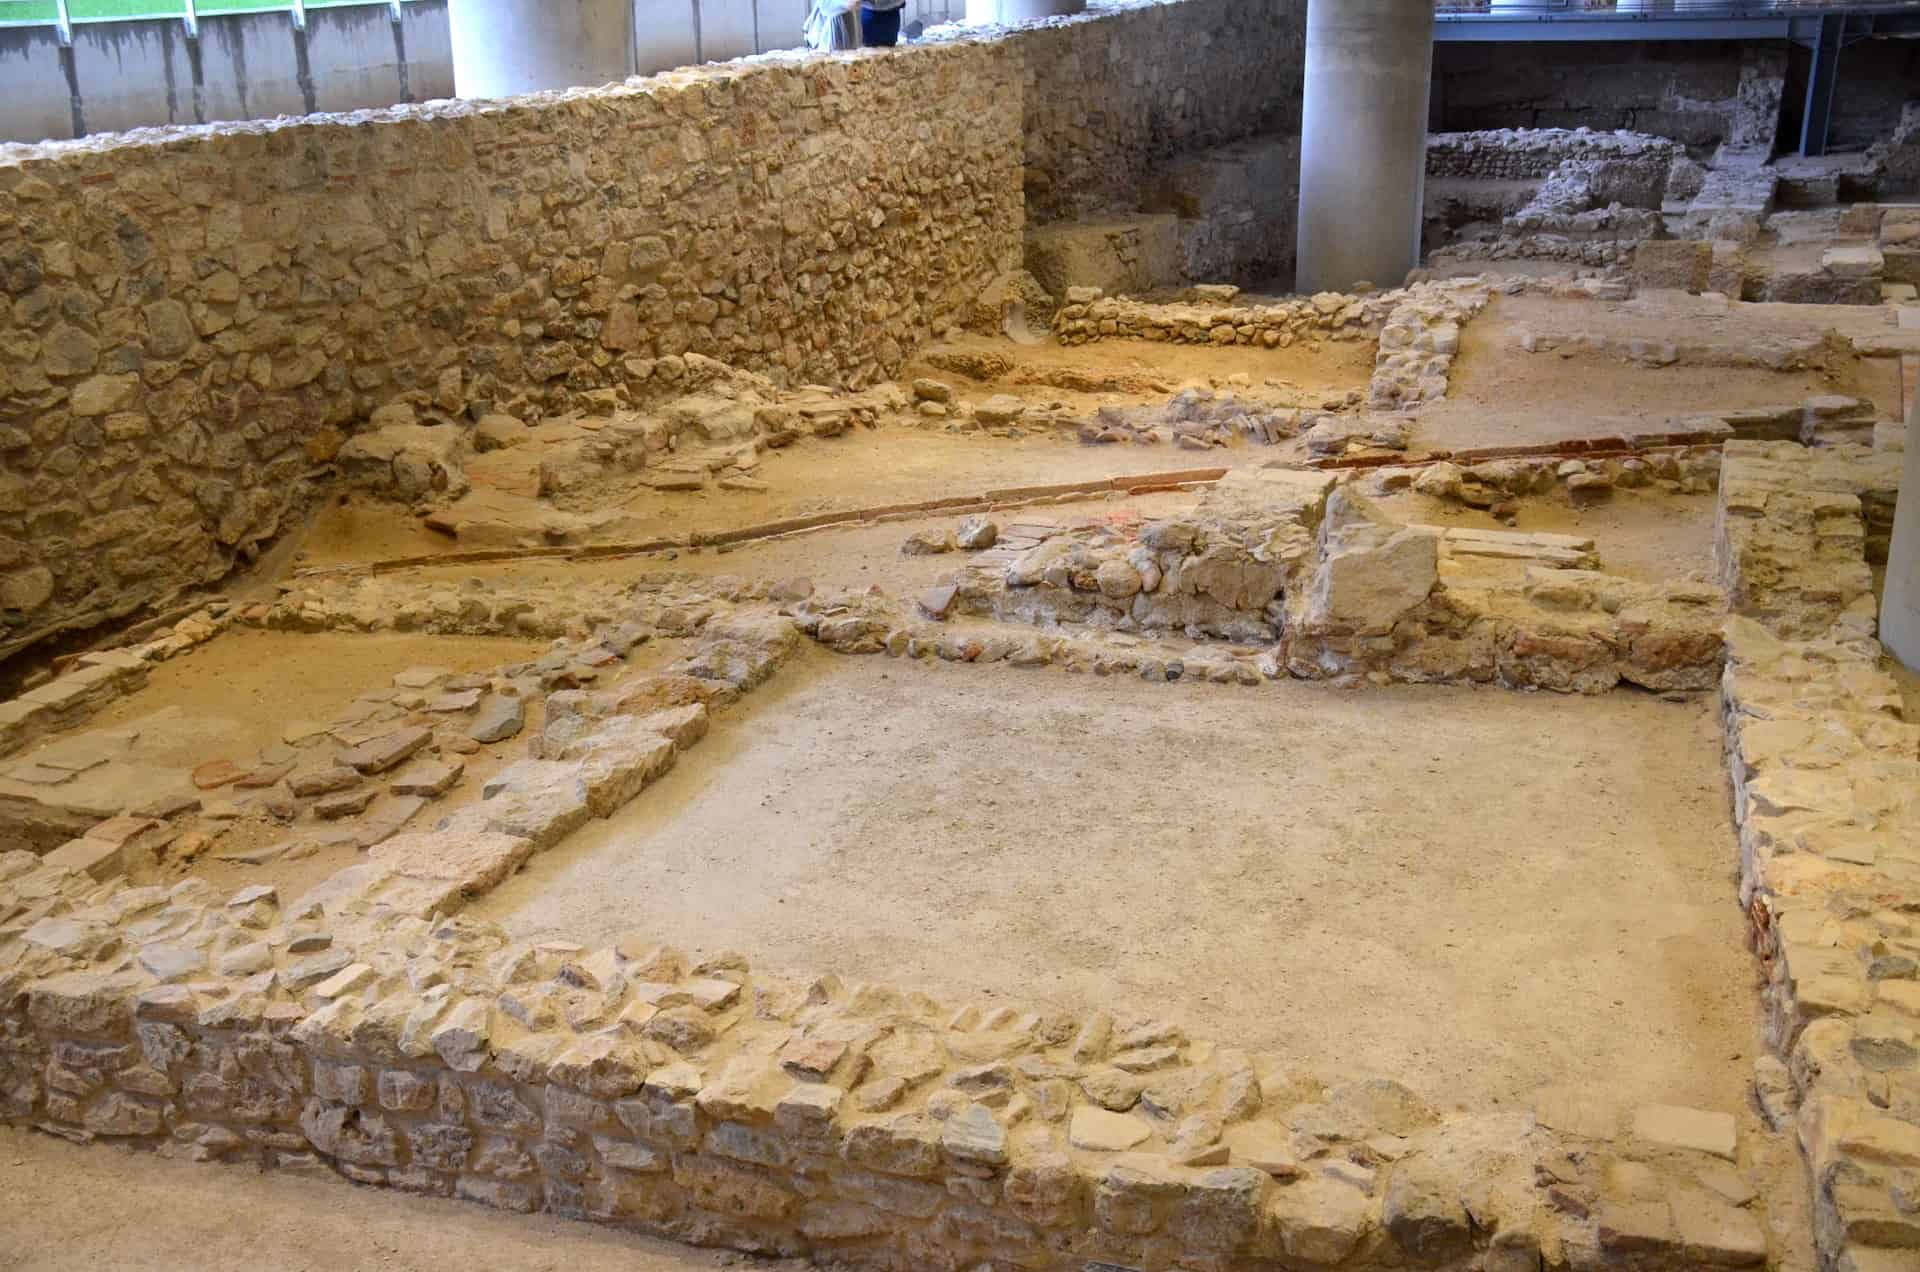 House Γ in the archaeological site at the Acropolis Museum in Athens, Greece